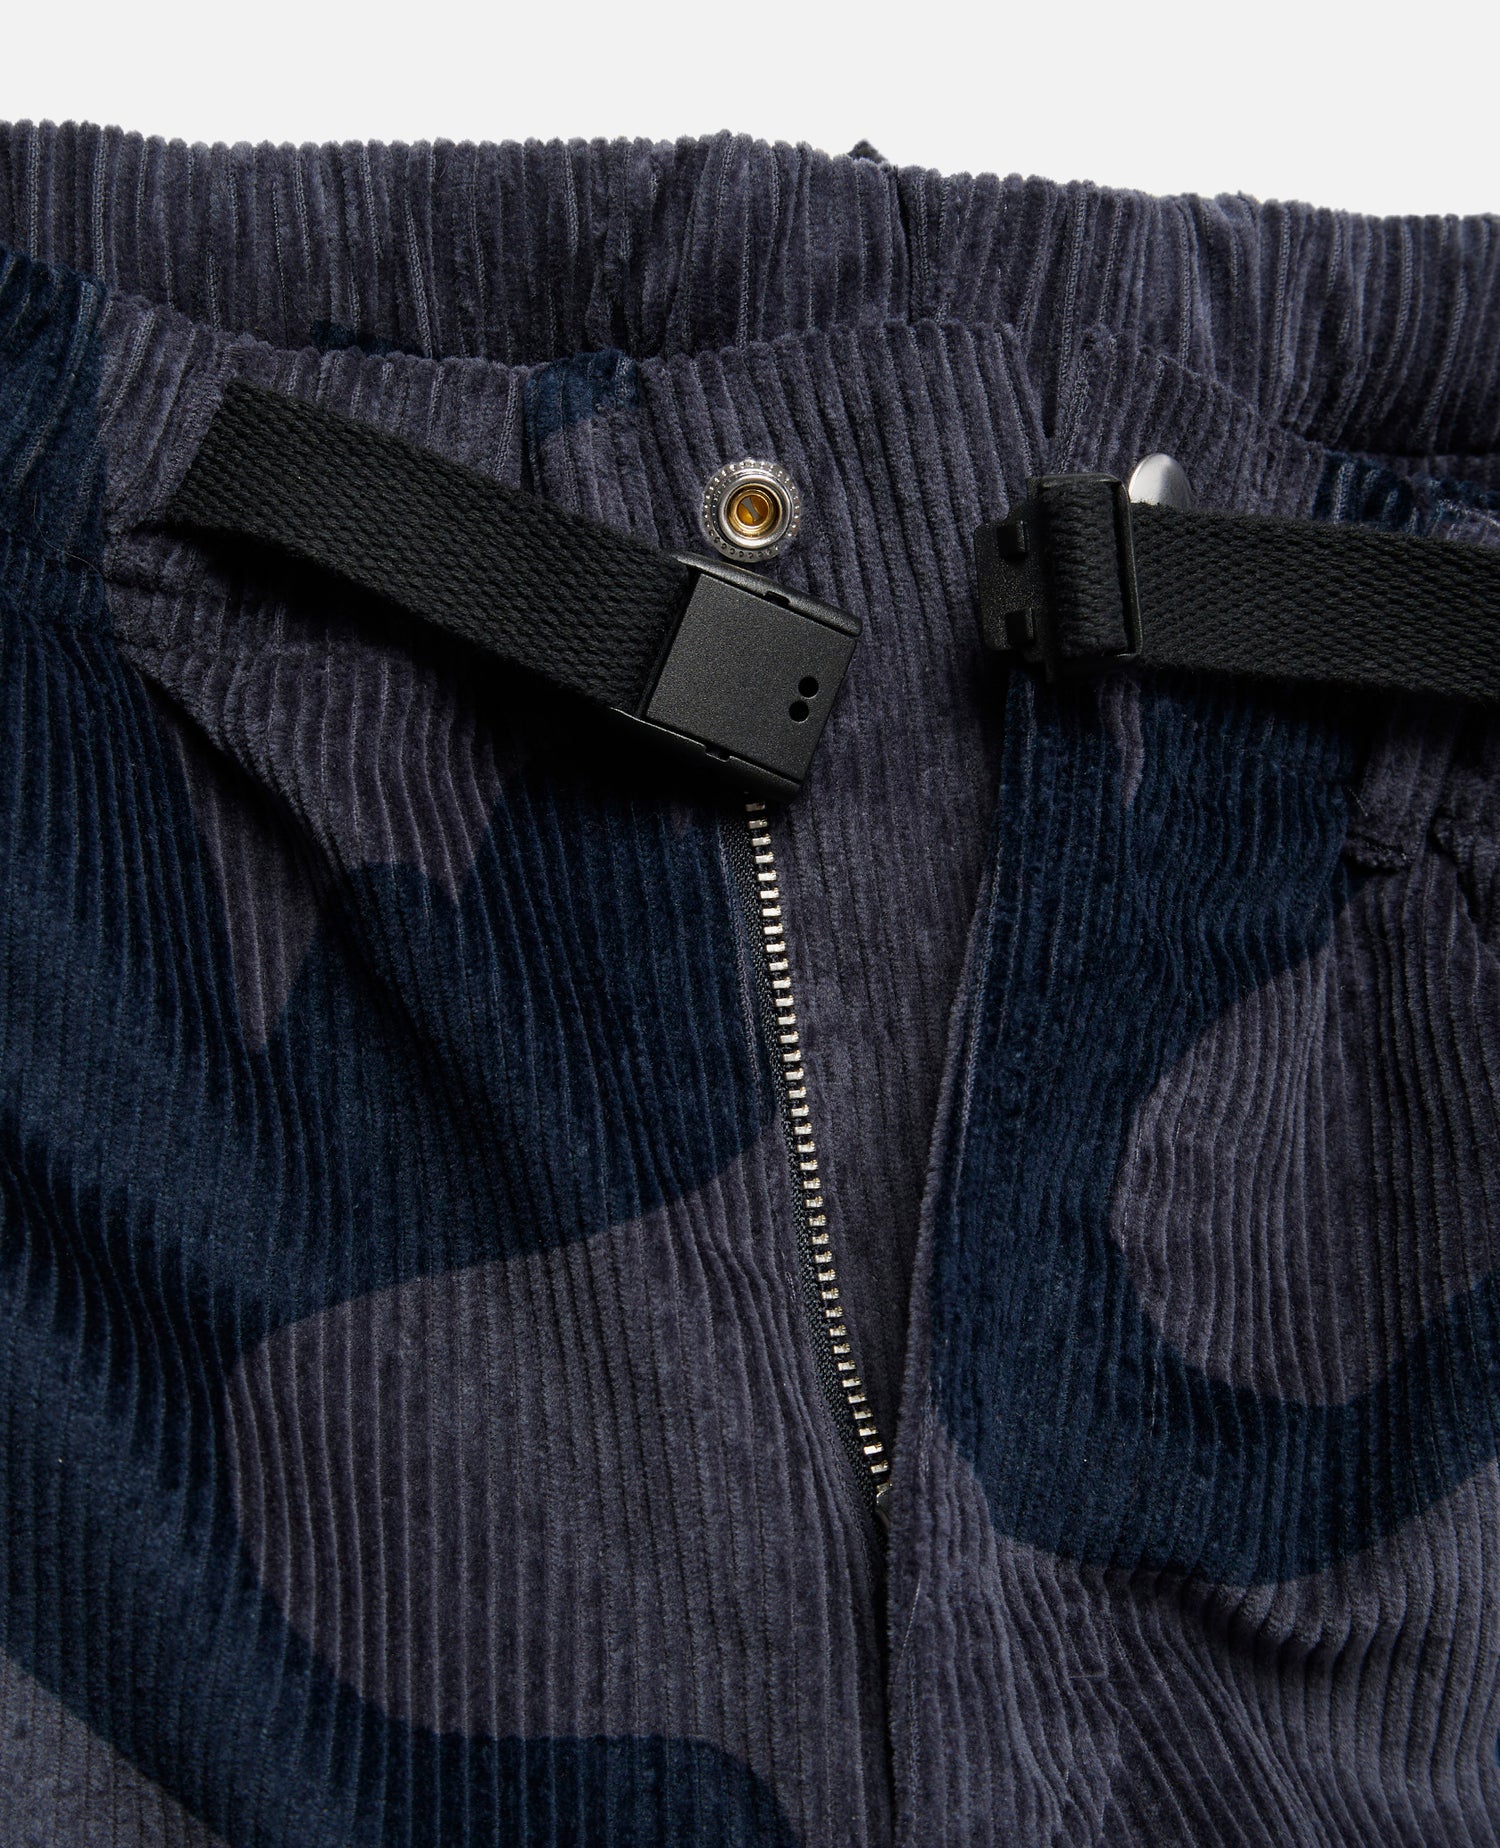 by Parra Clipped Wings Corduroy Pants (Greyish Blue)